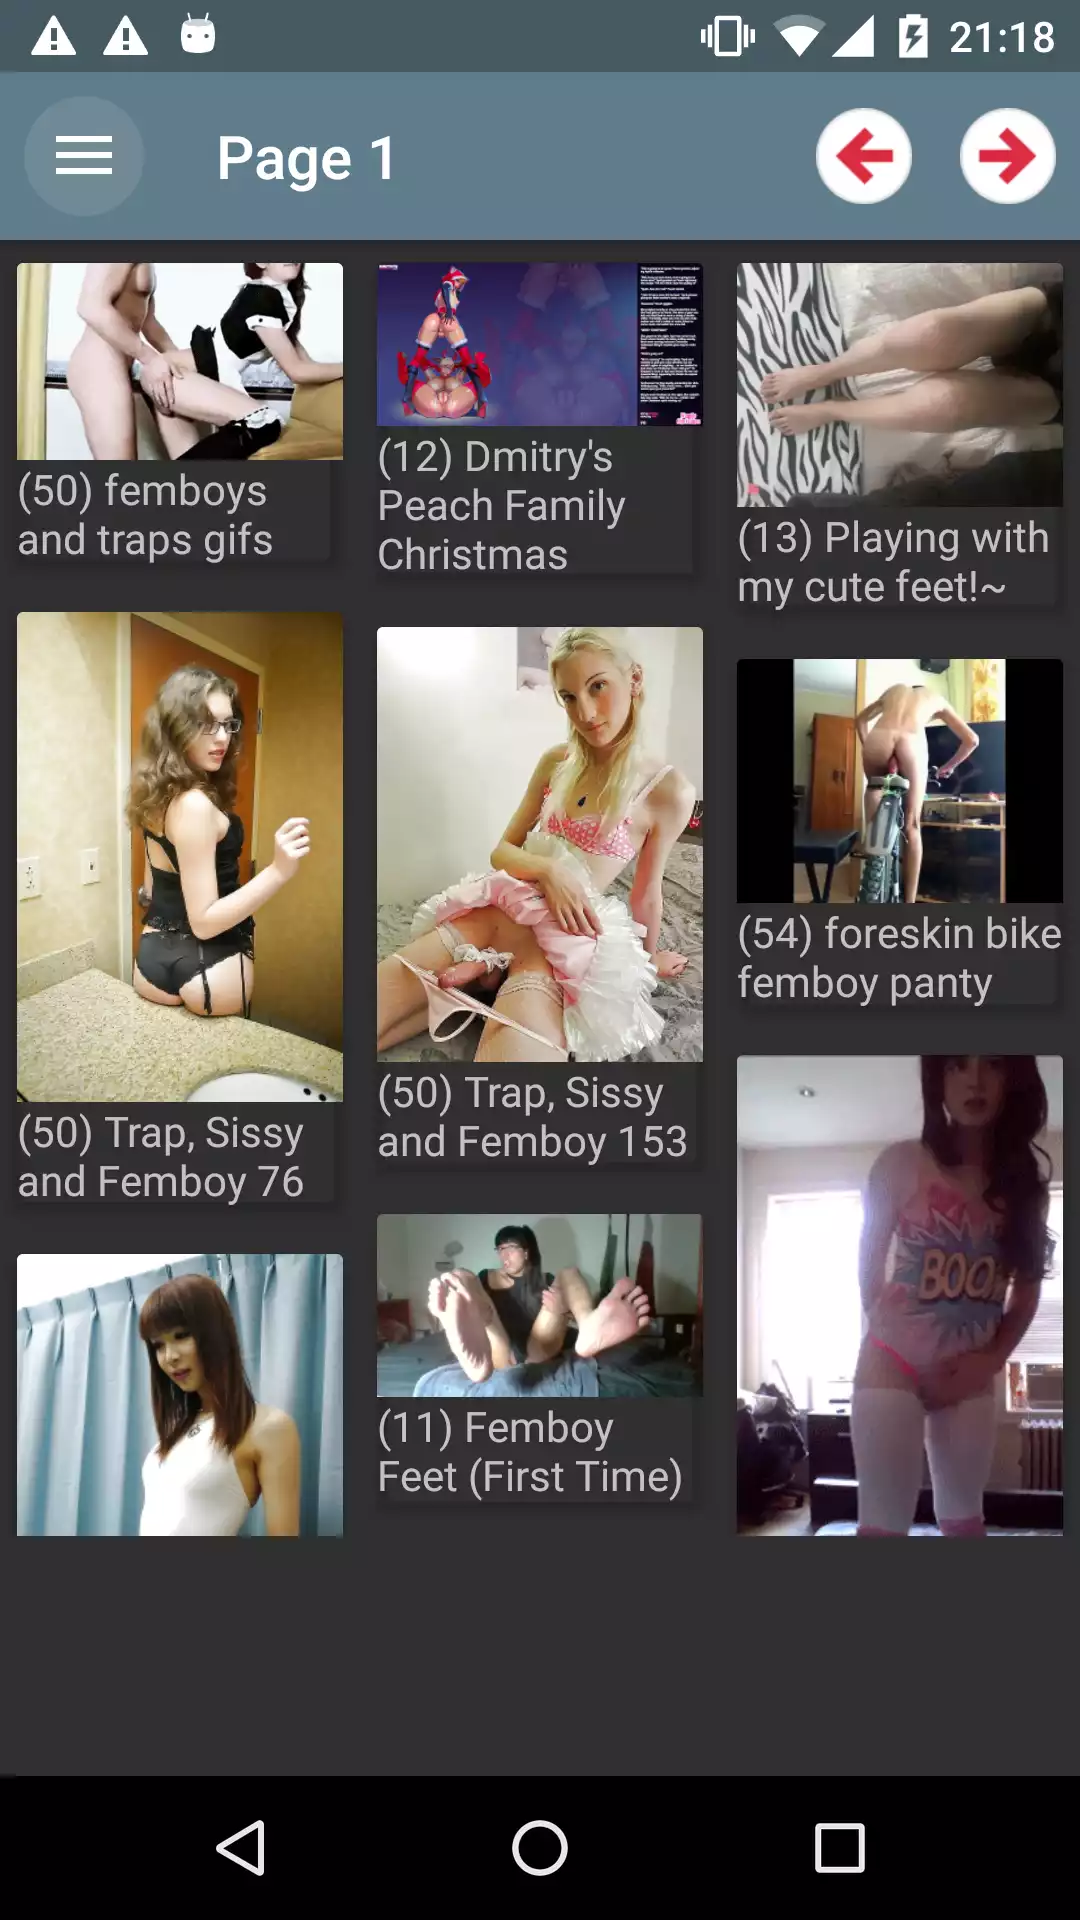 Femboy Galleries sexy,hentie,app,free,texas,futanari,android,alexis,for,hentai,photos,anime,gallery,apps,watching,excuses,pics,galleries,apk,porn,hot,manga,adult